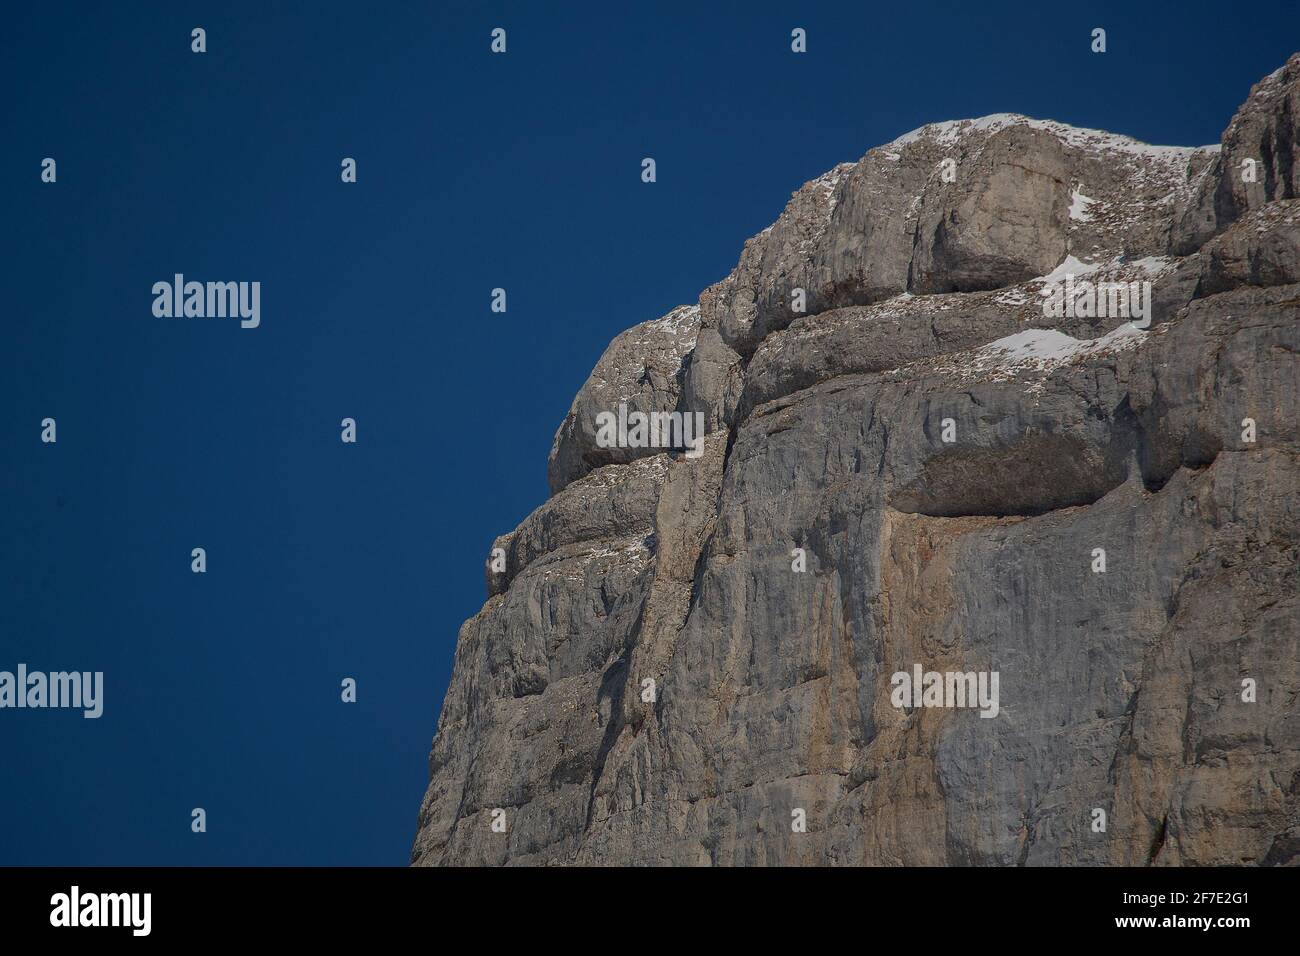 Detail of Rocky formation on the top of the Leysin mountain range in switzerland on a cold winter day. Stock Photo